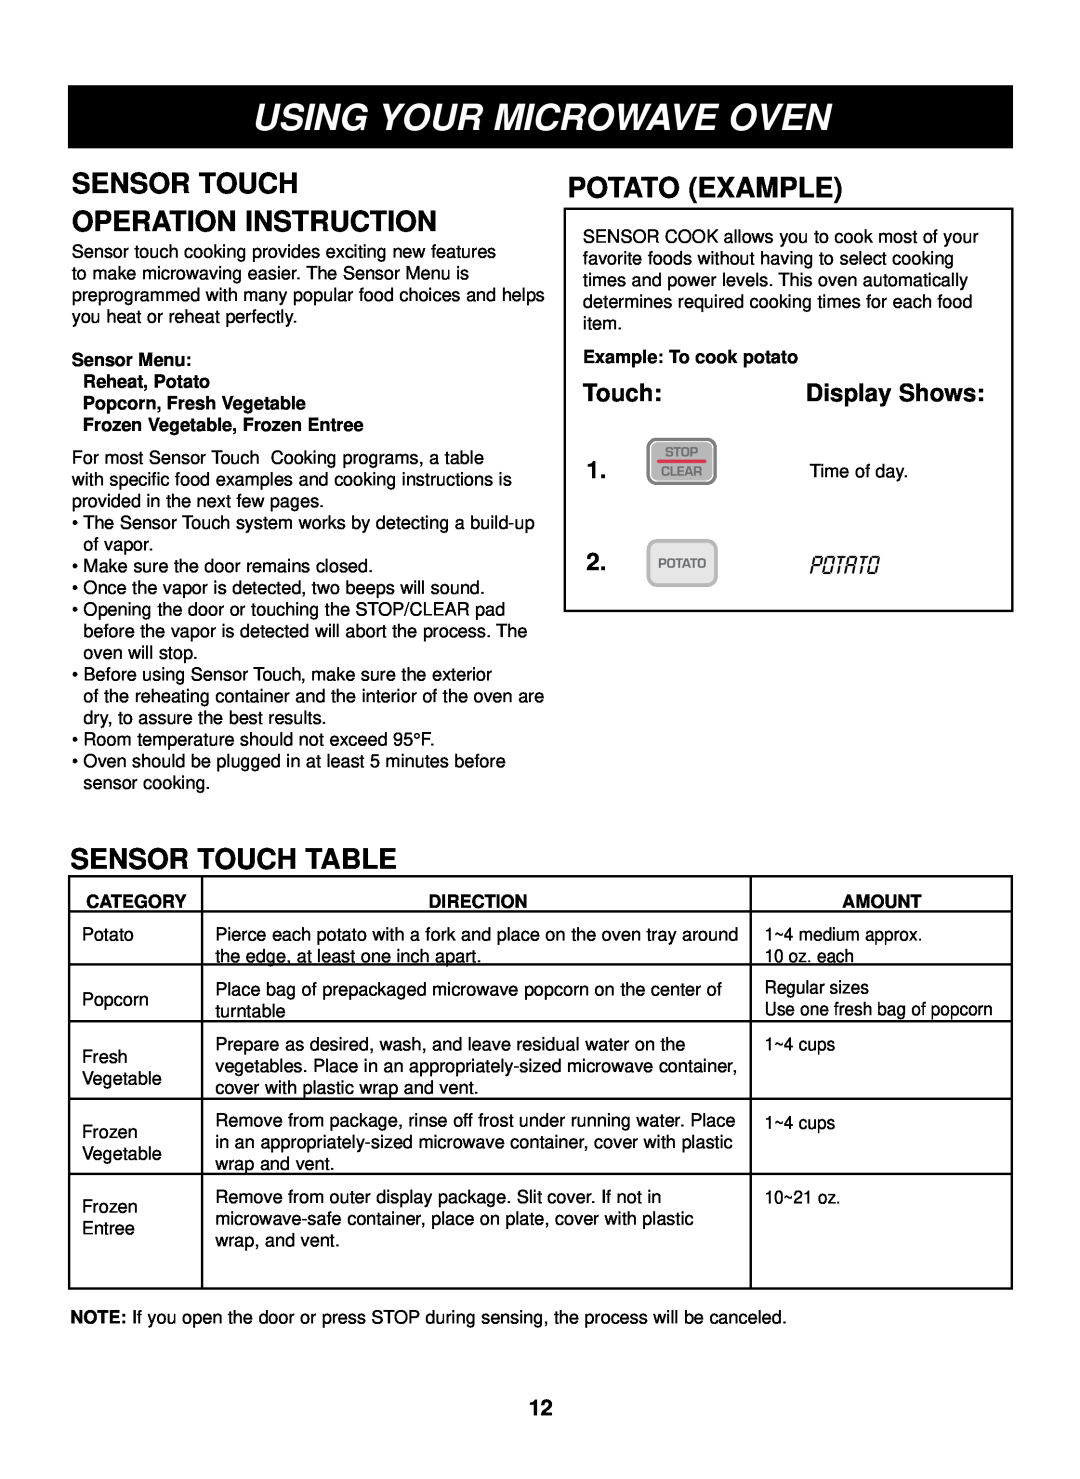 LG Electronics LCRM1240ST, LCRM1240SB manual Operation Instruction, Potato Example, Sensor Touch Table, Display Shows 